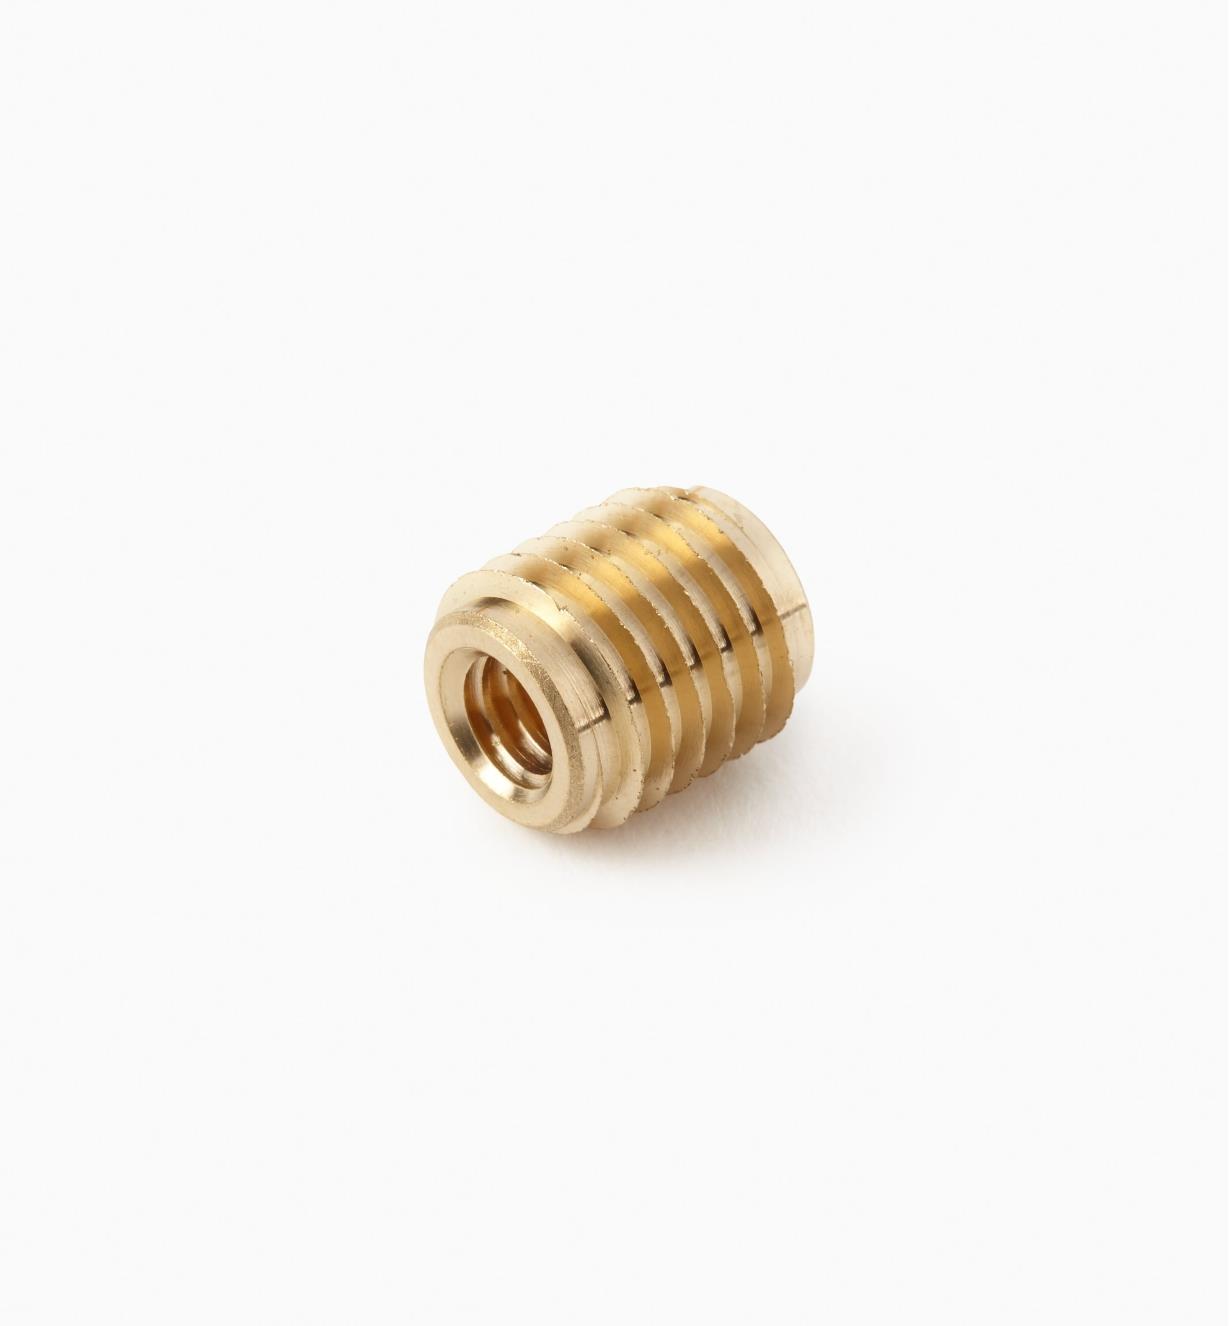 Yinpecly 1/4-20 Copper Knurled Threaded Insert Nuts Thread Embedment Nut Assortment for Electrical Appliances Gold Tone 10pcs 